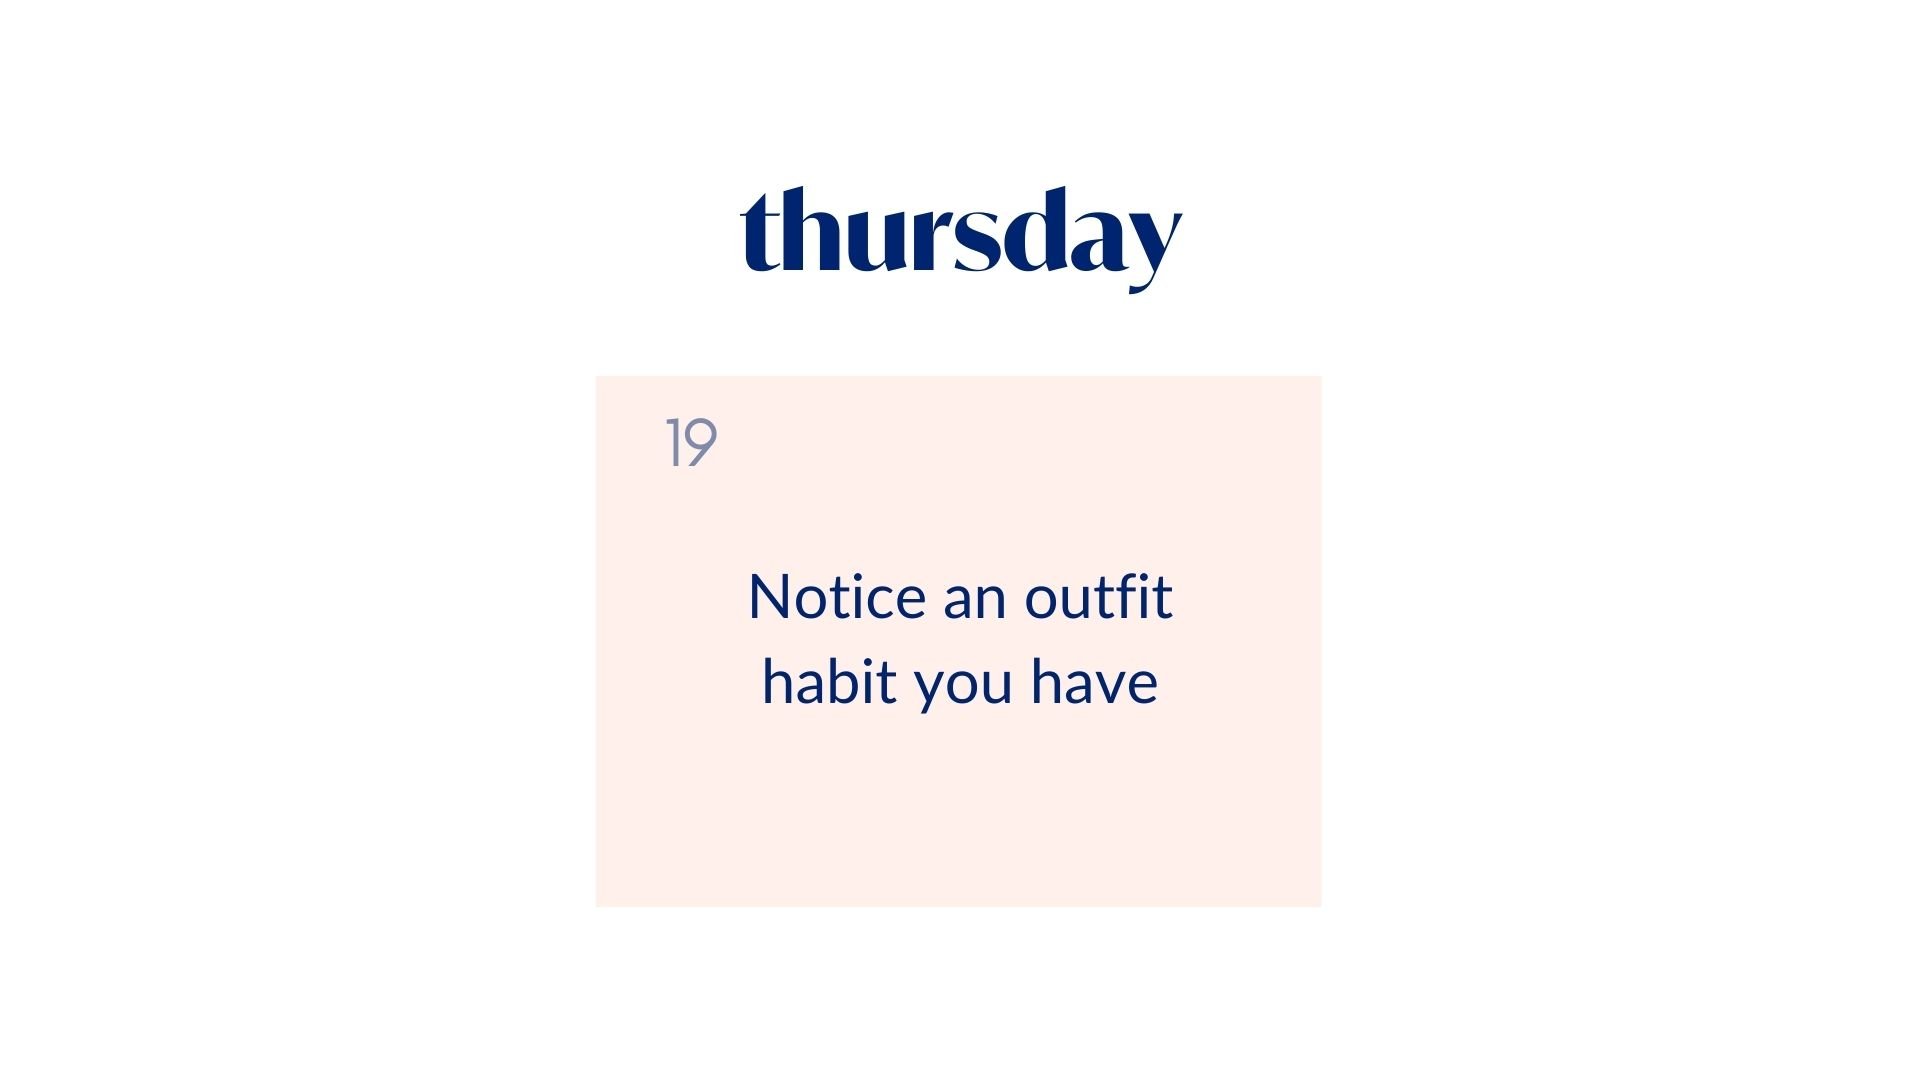 Day 19: Notice an outfit habit you have